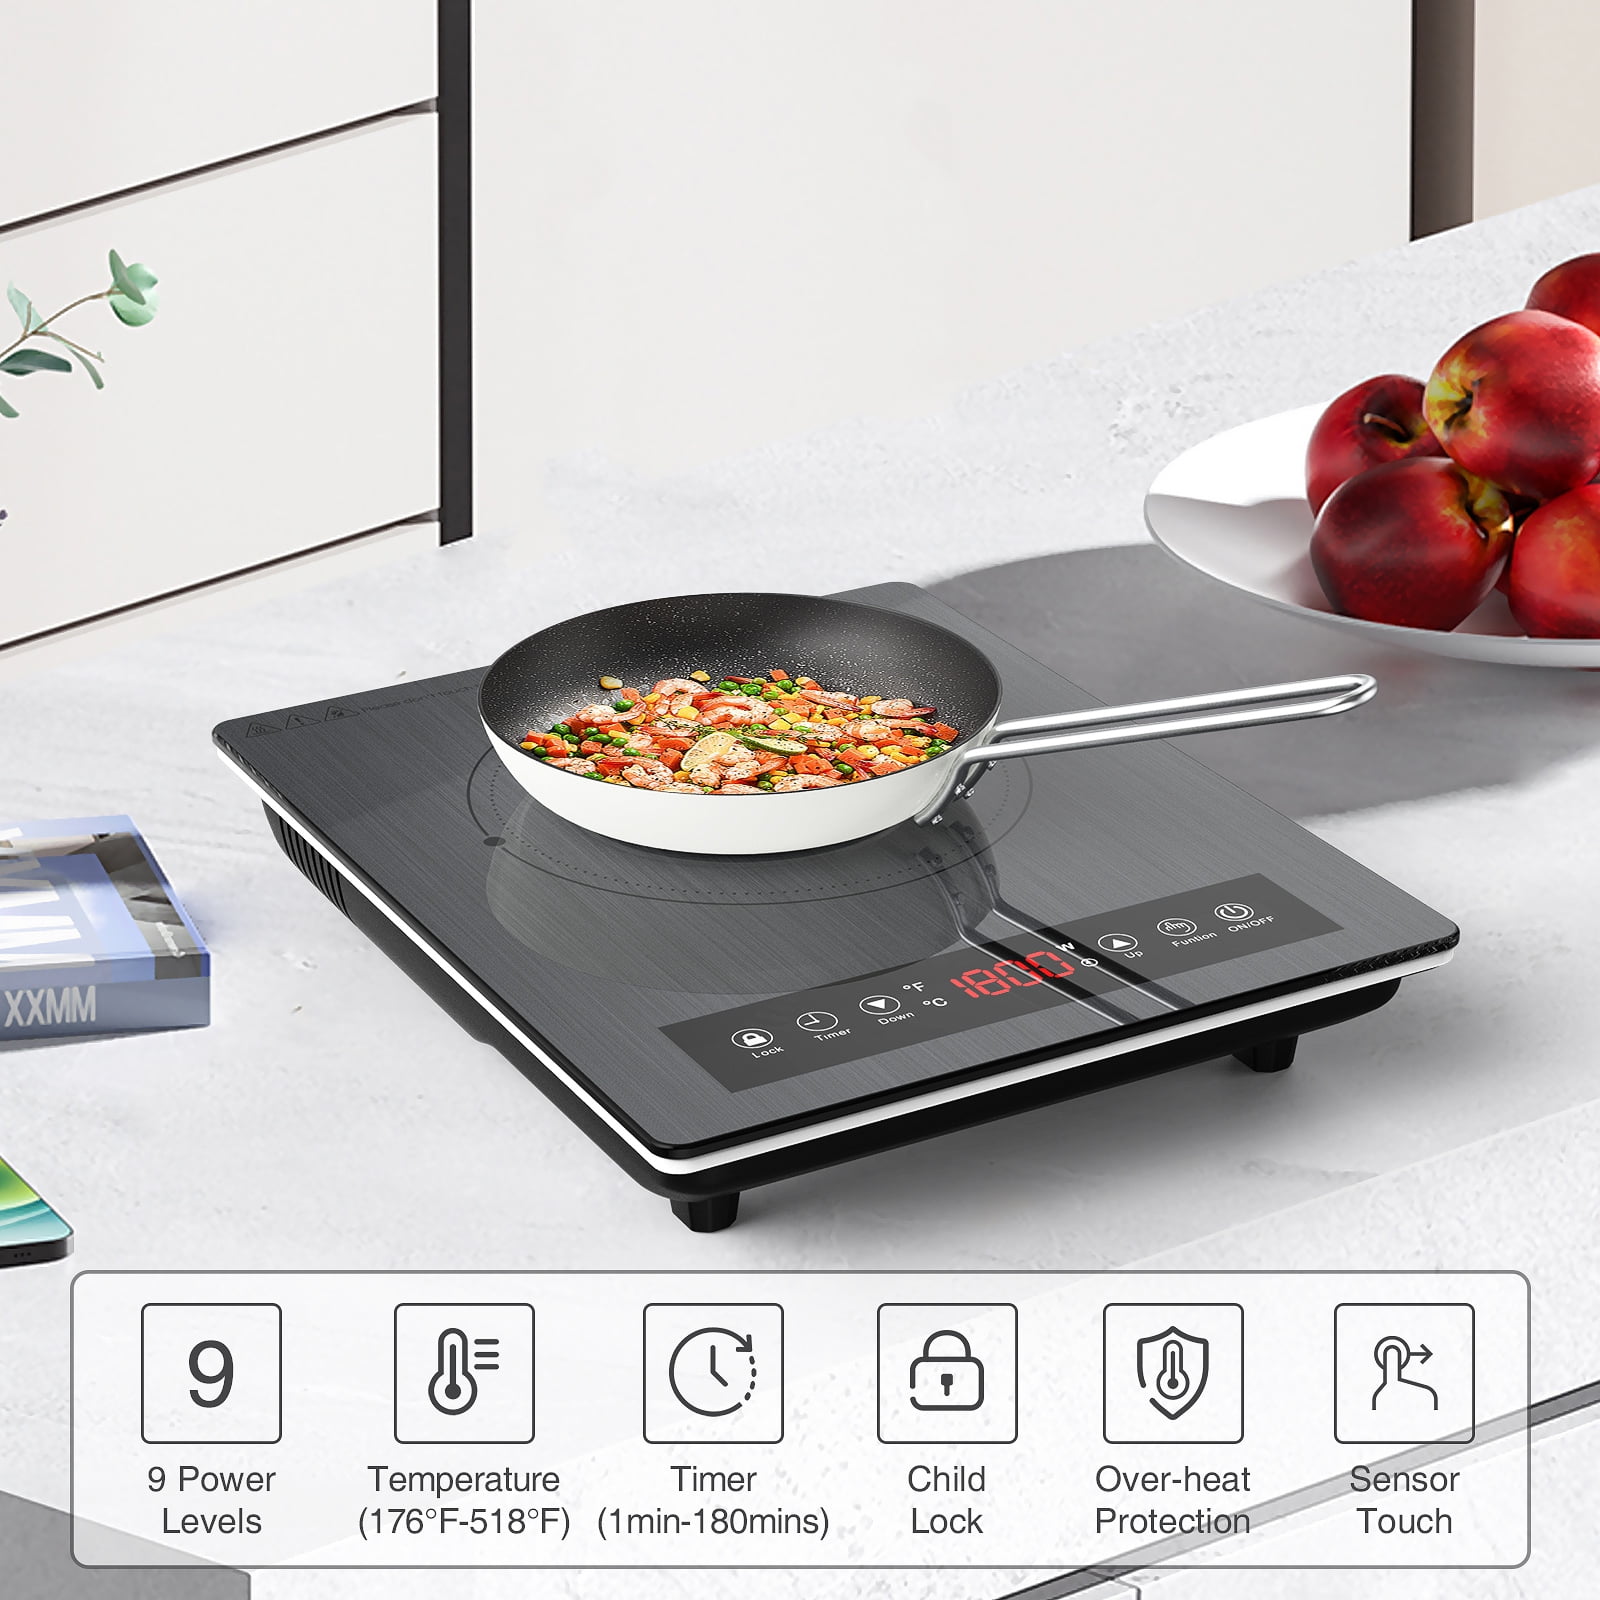 VBGK Electric Cooktop Single Burner 1800W 110v,Electric Stove Top Plug in  Electric Burner Countertop Hot Plate for Cooking,4H & Auto Shutdown  Induction Burner,Child Lock Electric Cooktop 